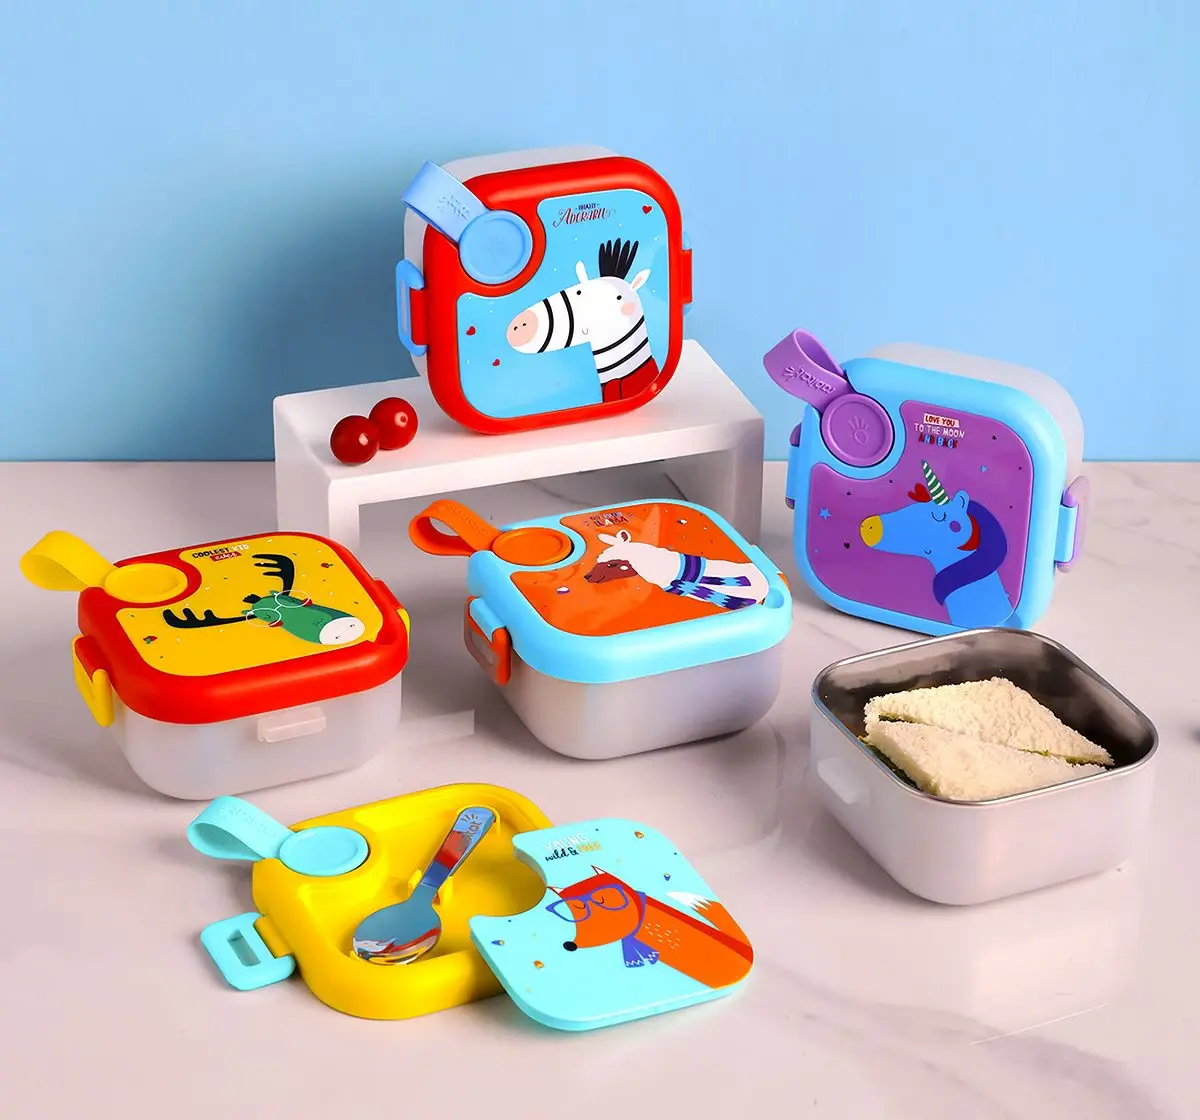 Rabitat Lunchmate Mini Stainless Steel Lunch Box with Spoon Young Wild & Free 500 ml For Kids of Age 3Y+, Multicolour